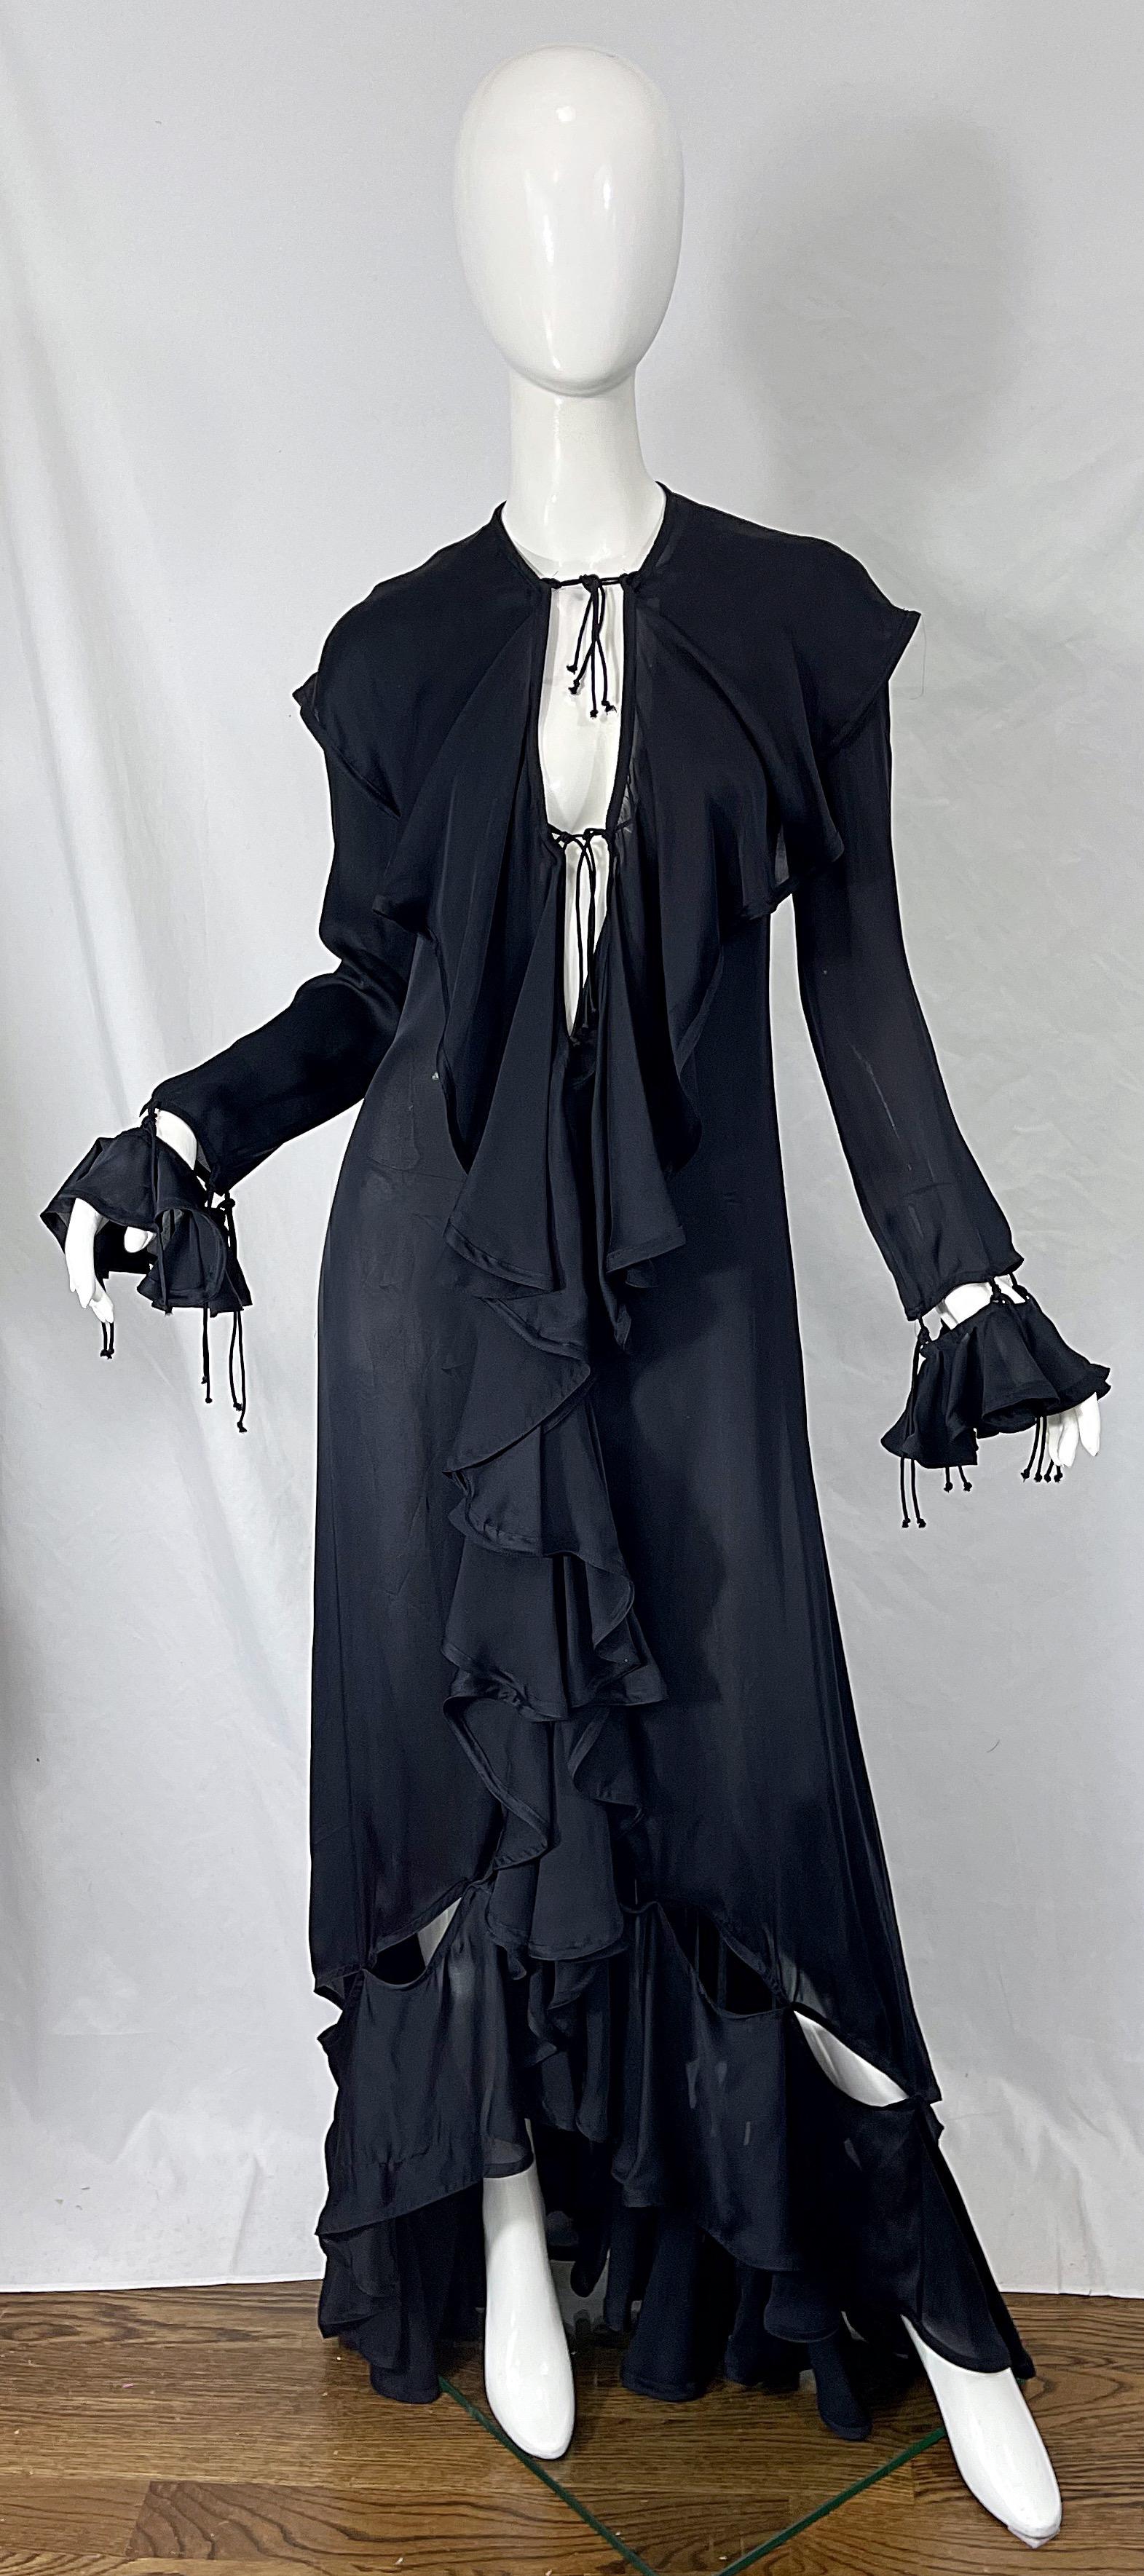 Yves Saint Laurent by Tom Ford Fall 2003 Runway Black Silk Chiffon Gown Size 38 For Sale 1